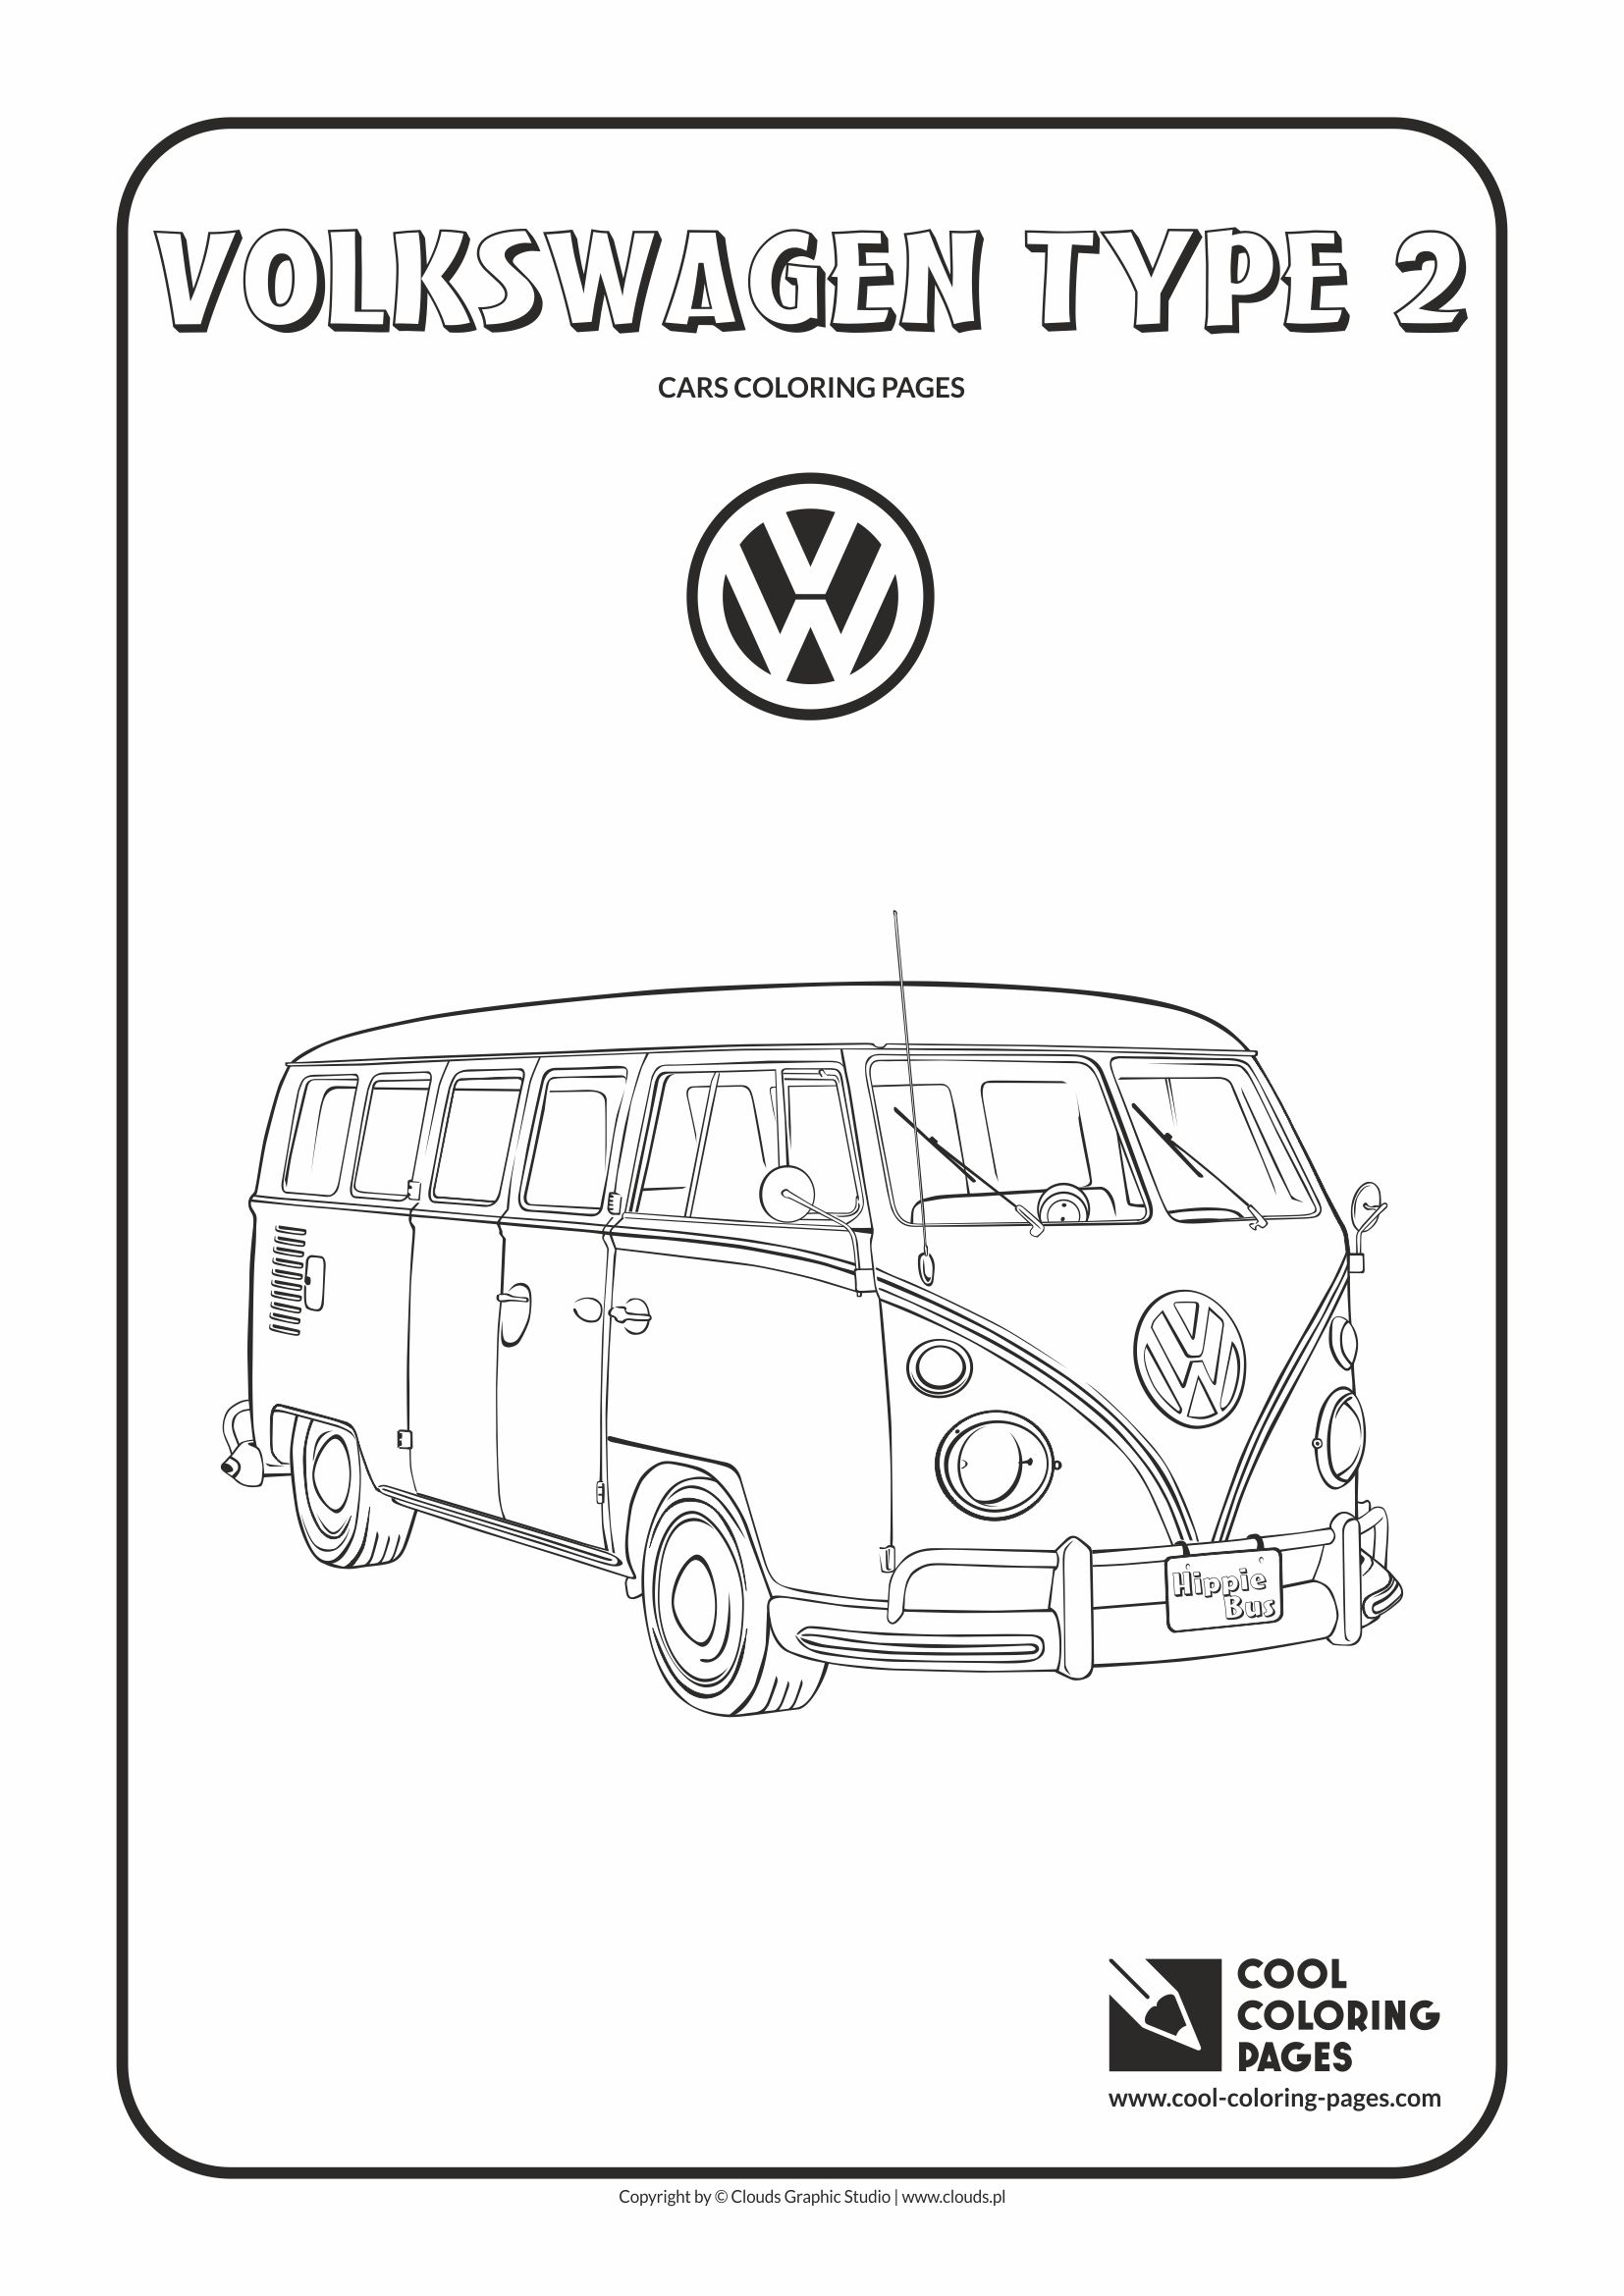 Cool Coloring Pages - Vehicles / Volkswagen type 2 / Coloring page with Volkswagen type 2